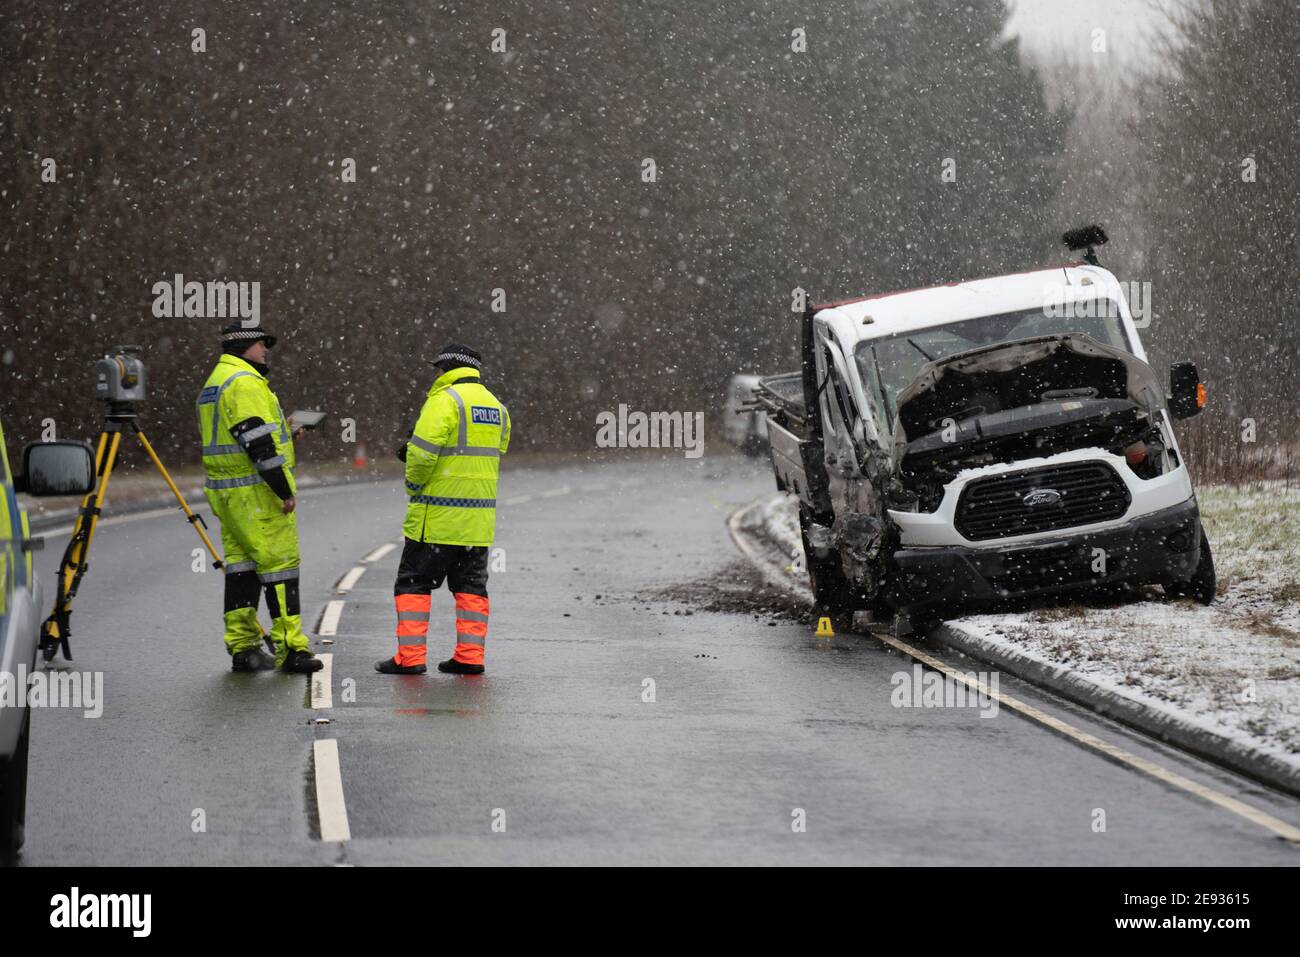 EXCLUSIVE Birkhill, Scotland, UK. 2 February 2021. Police accident investigation officers attend scene of serious multiple vehicle traffic accident on A68 at Birkhill north of Earlston in Scottish Borders.  The A68. Remains closed in both directions at Lauder and Earlston. Iain Masterton/Alamy Live News Stock Photo